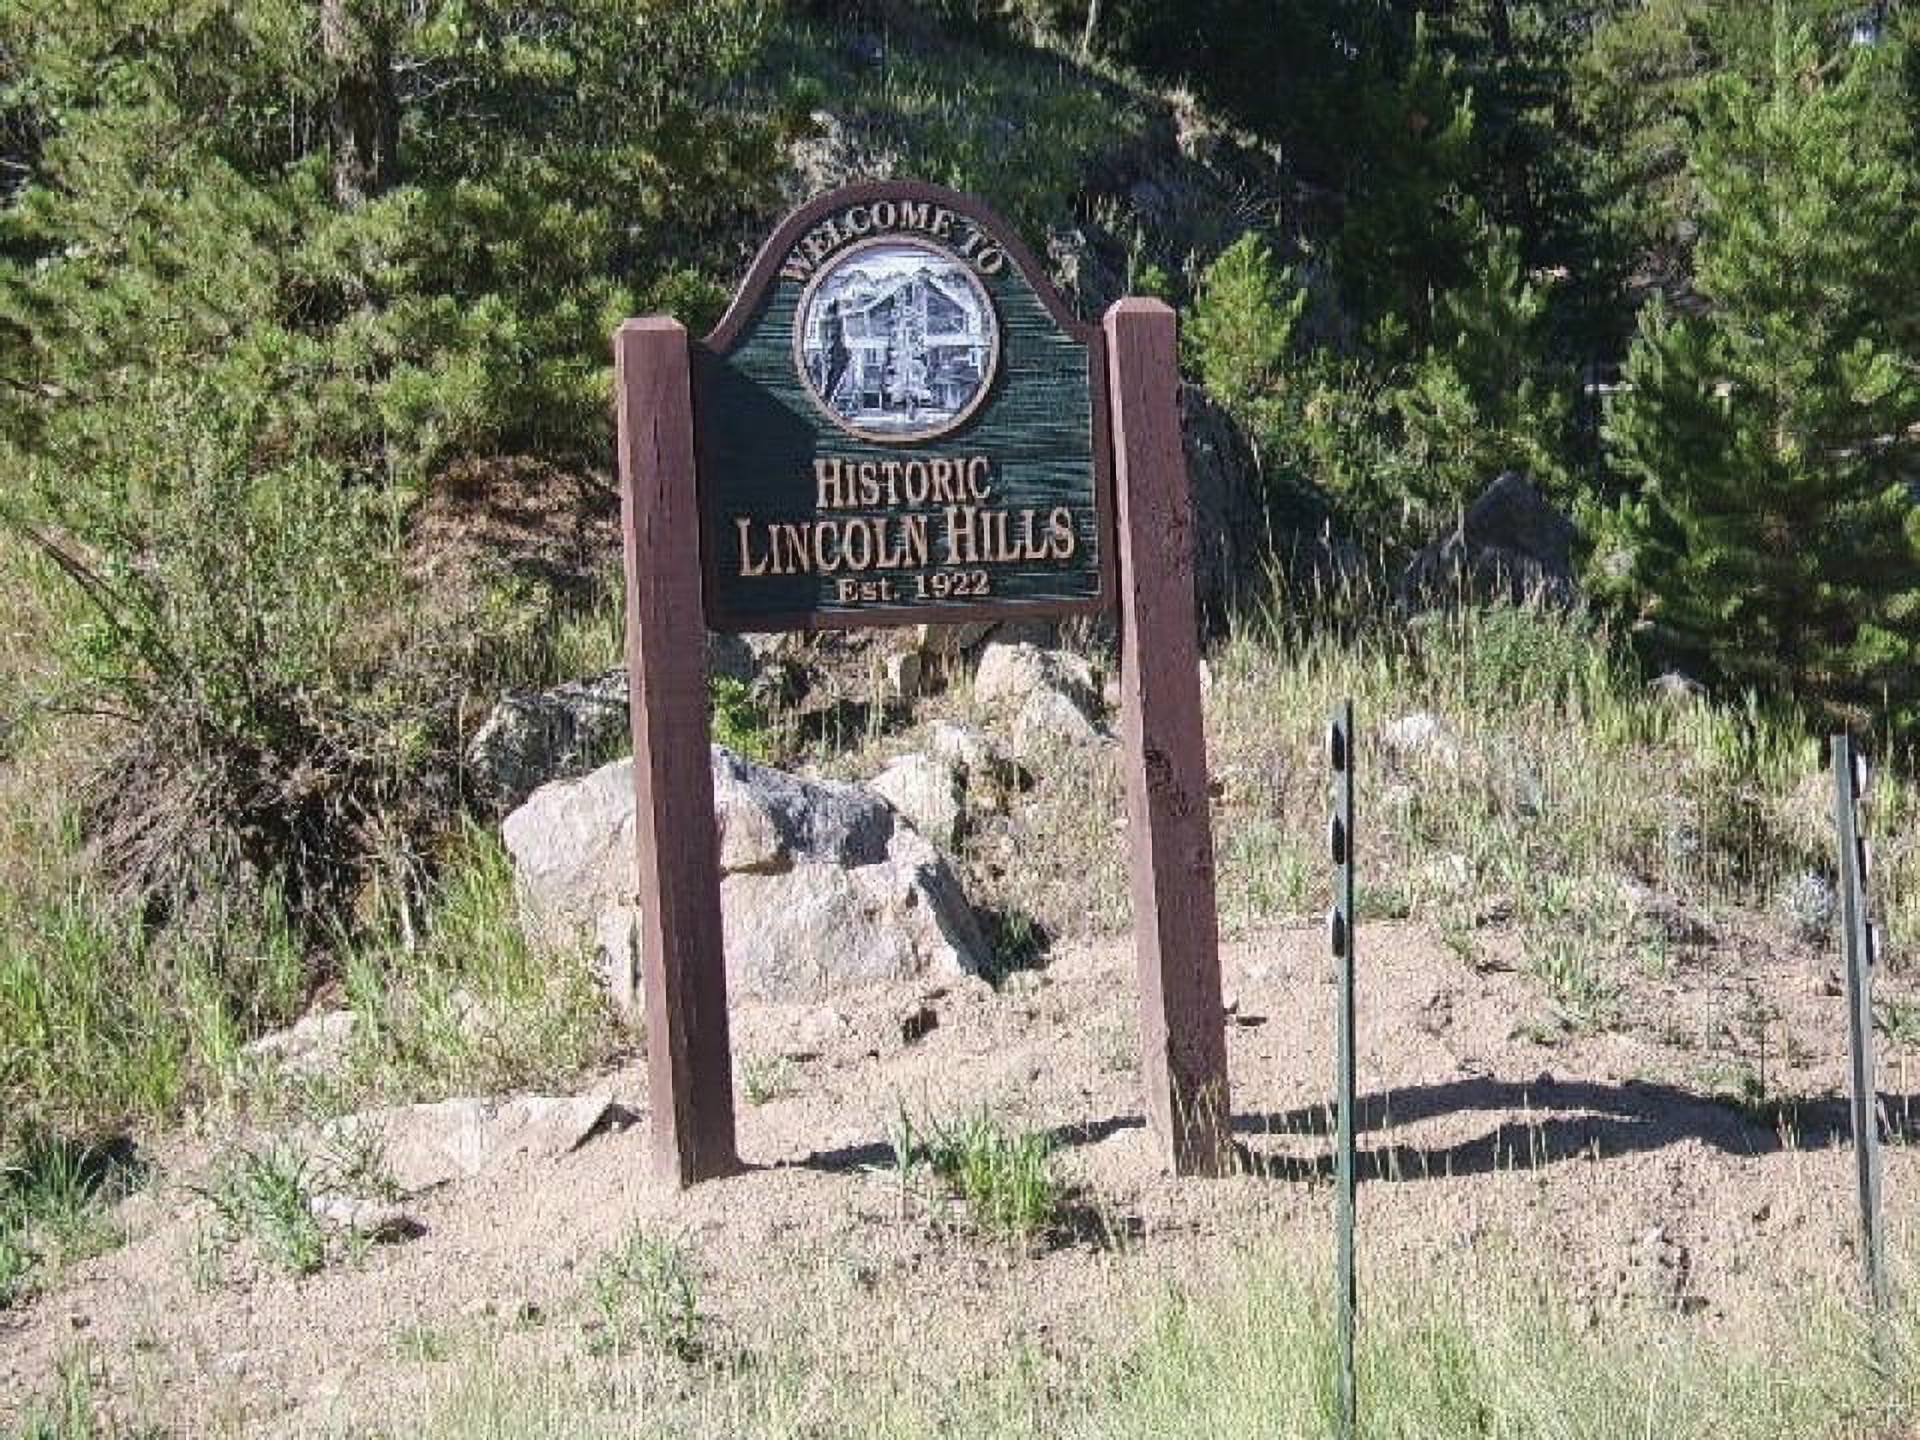 A sign by a trail reading: "Welcome to Historic Lincoln Hills, Established 1922."